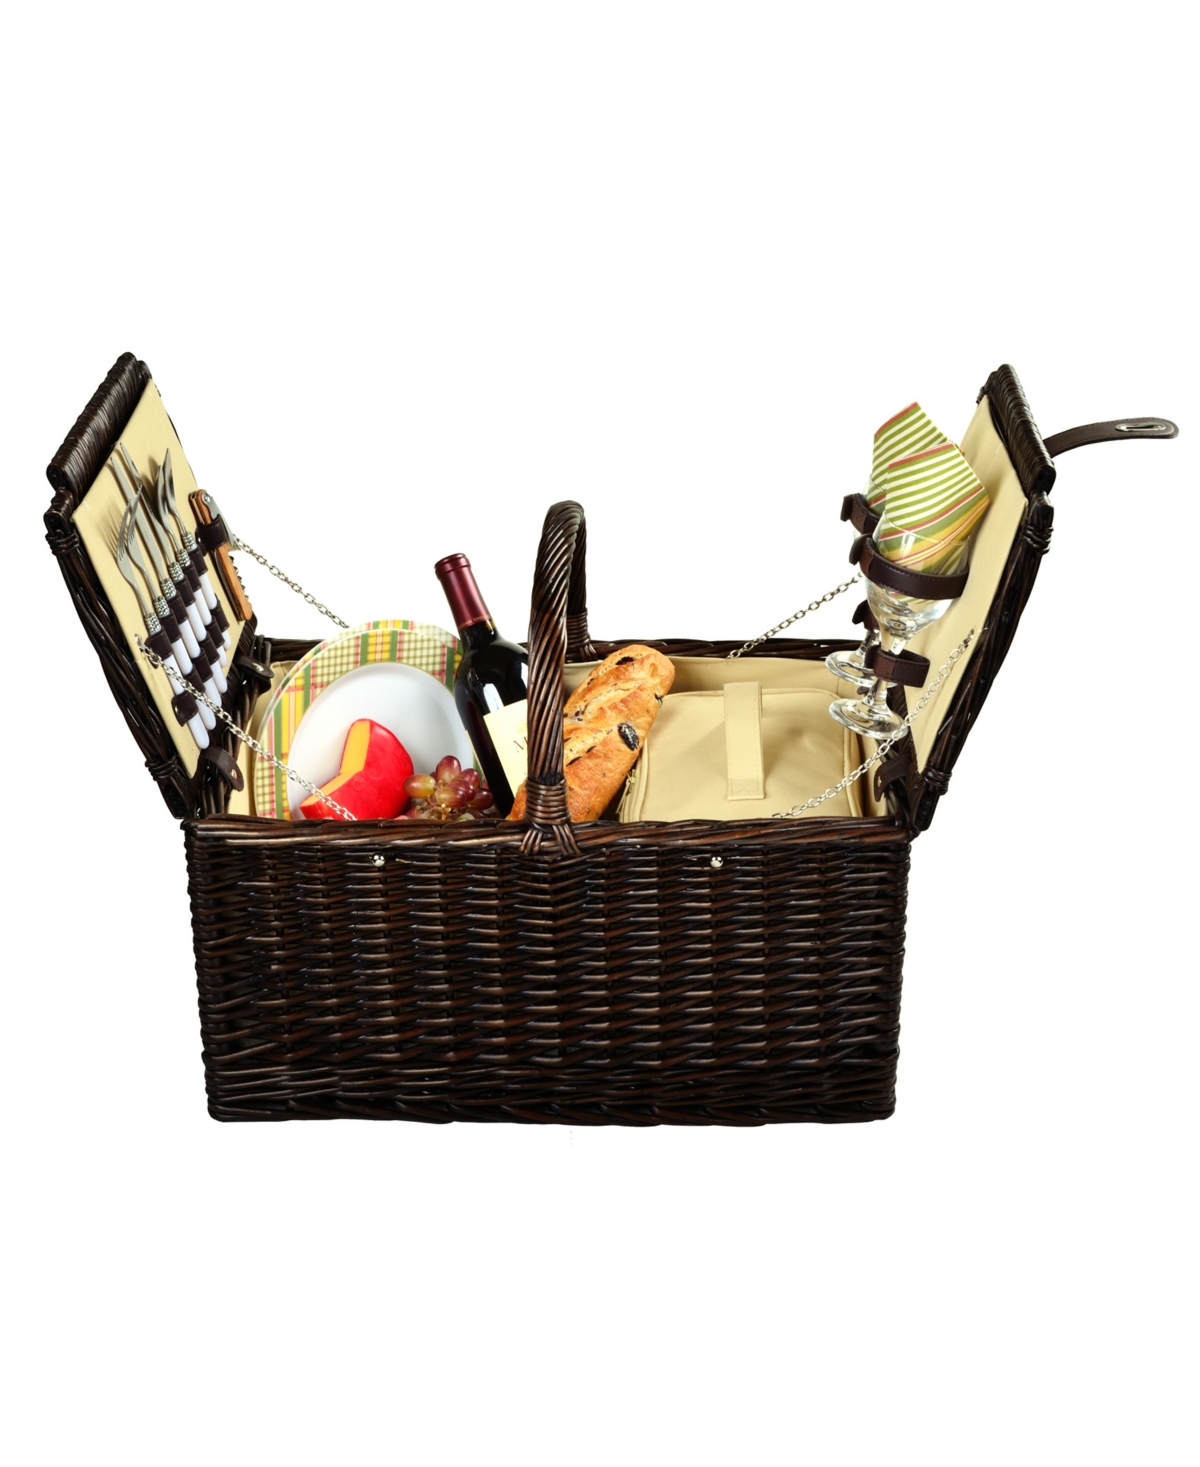 Surrey Willow Picnic Basket with Service for 2 - Orange